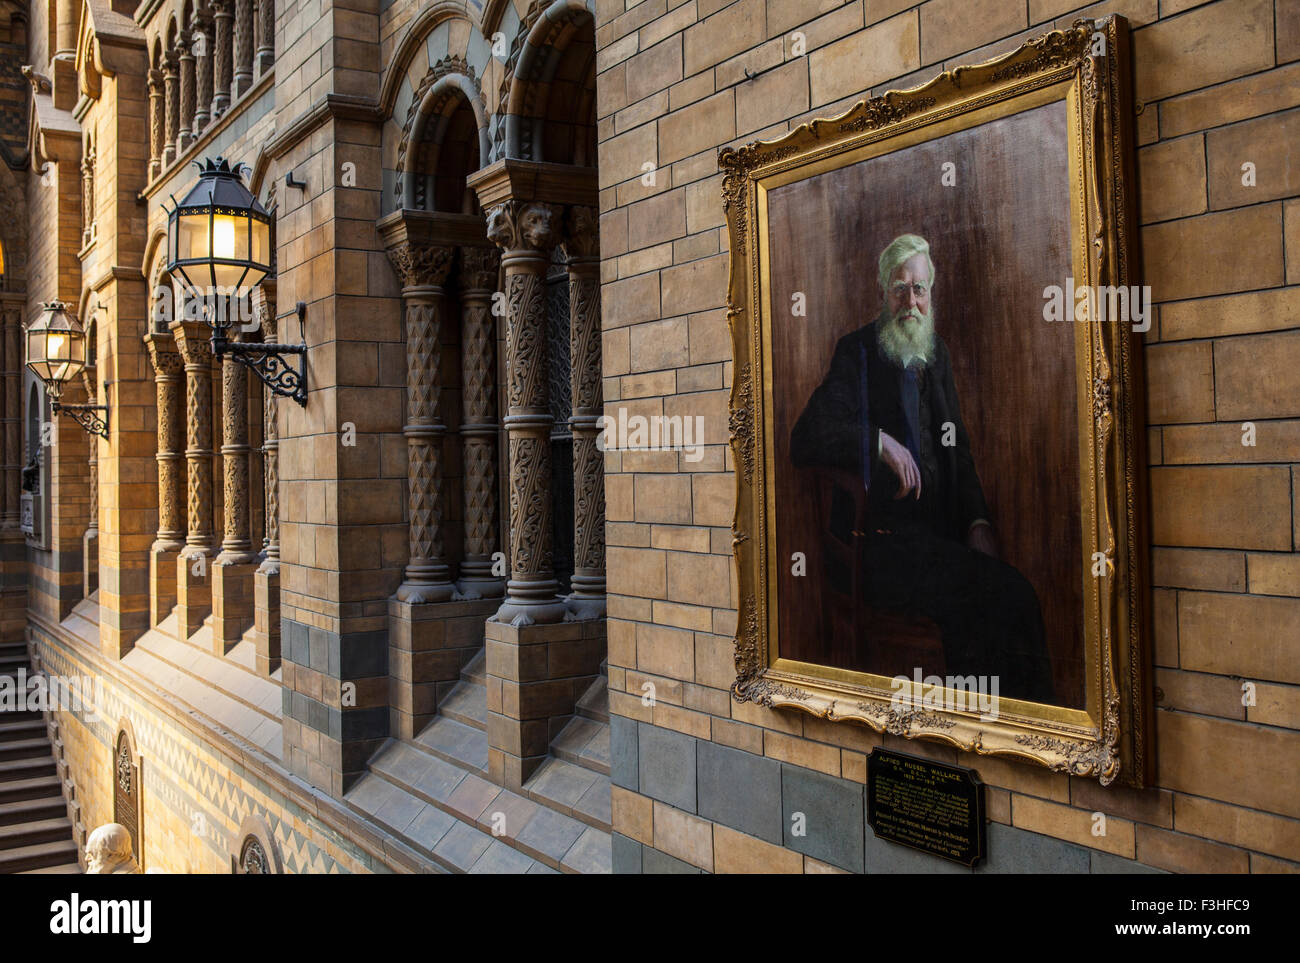 LONDON, UK - OCTOBER 1ST 2015: A painting of Alfred Russel Wallace in the Natural History Museum in London, on 1st October 2015. Stock Photo